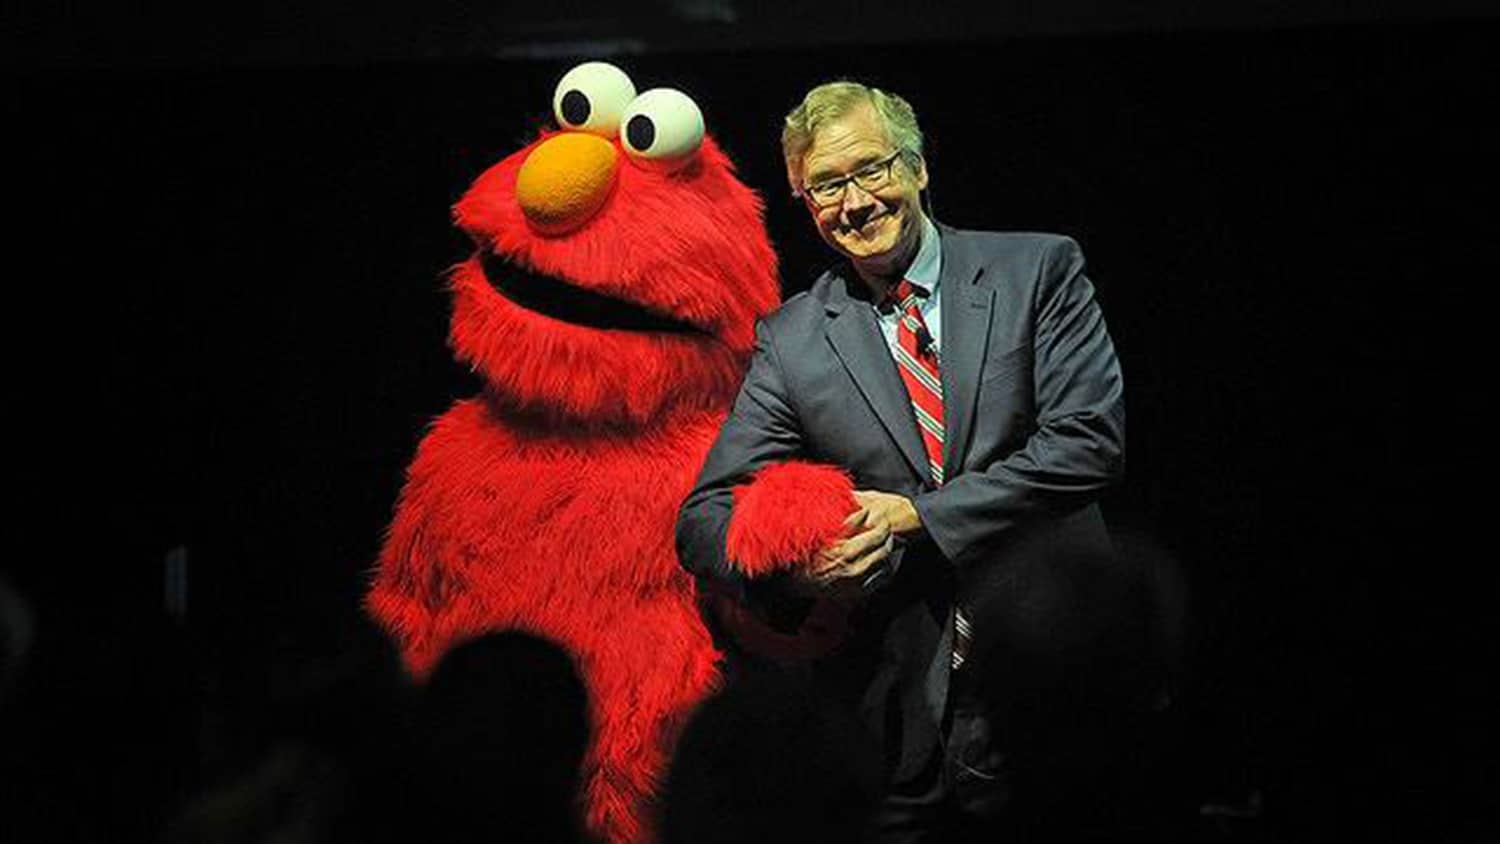 Boney on stage with Sesame Street character Elmo.